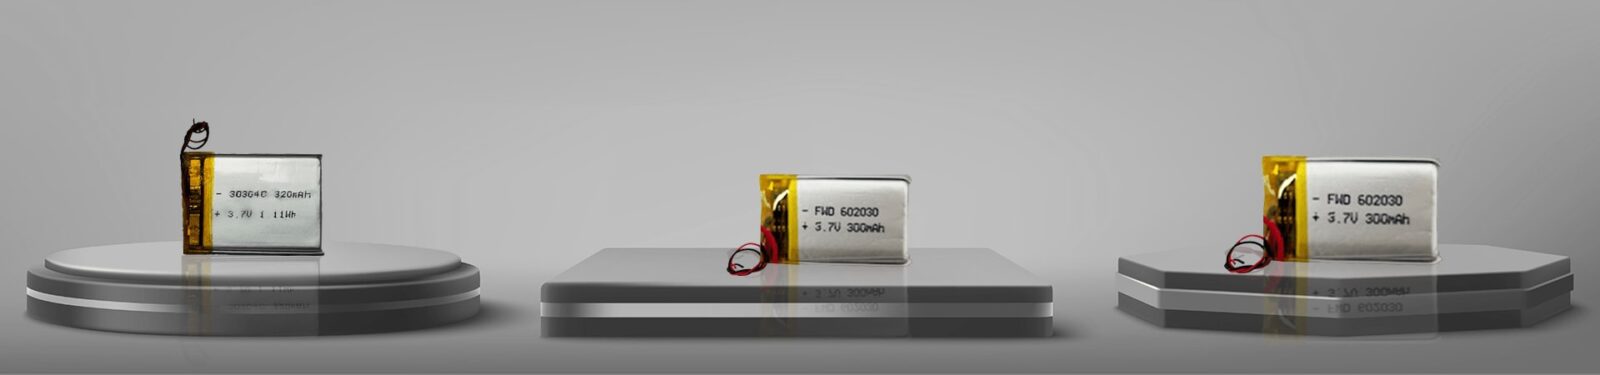 manufacturer-of-polymer-battery-in-india